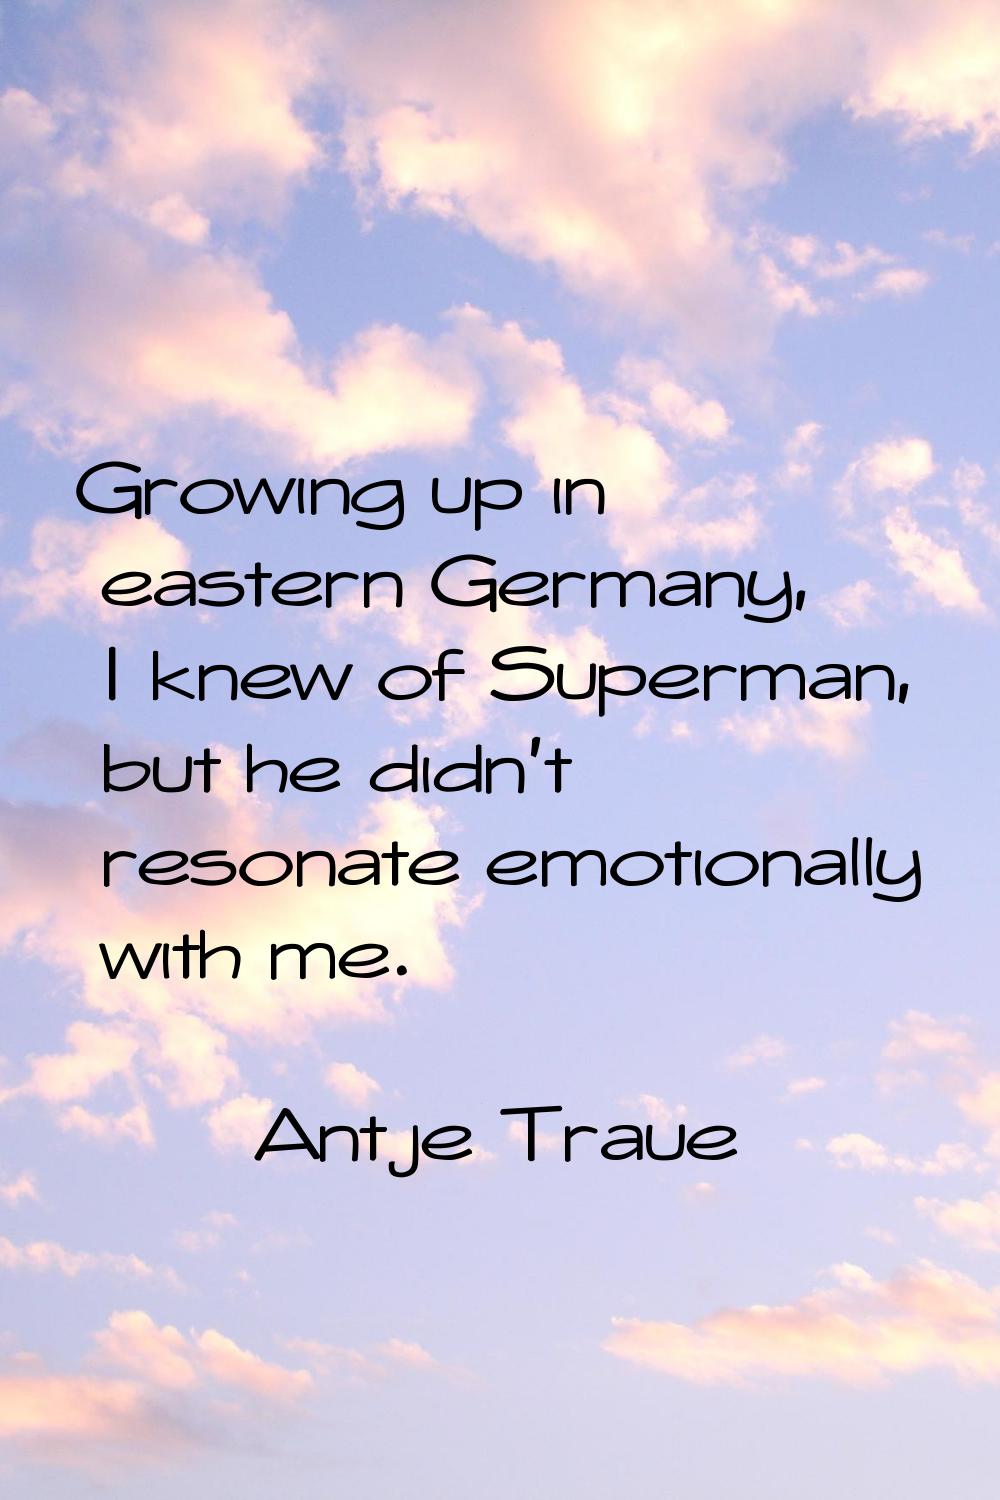 Growing up in eastern Germany, I knew of Superman, but he didn't resonate emotionally with me.